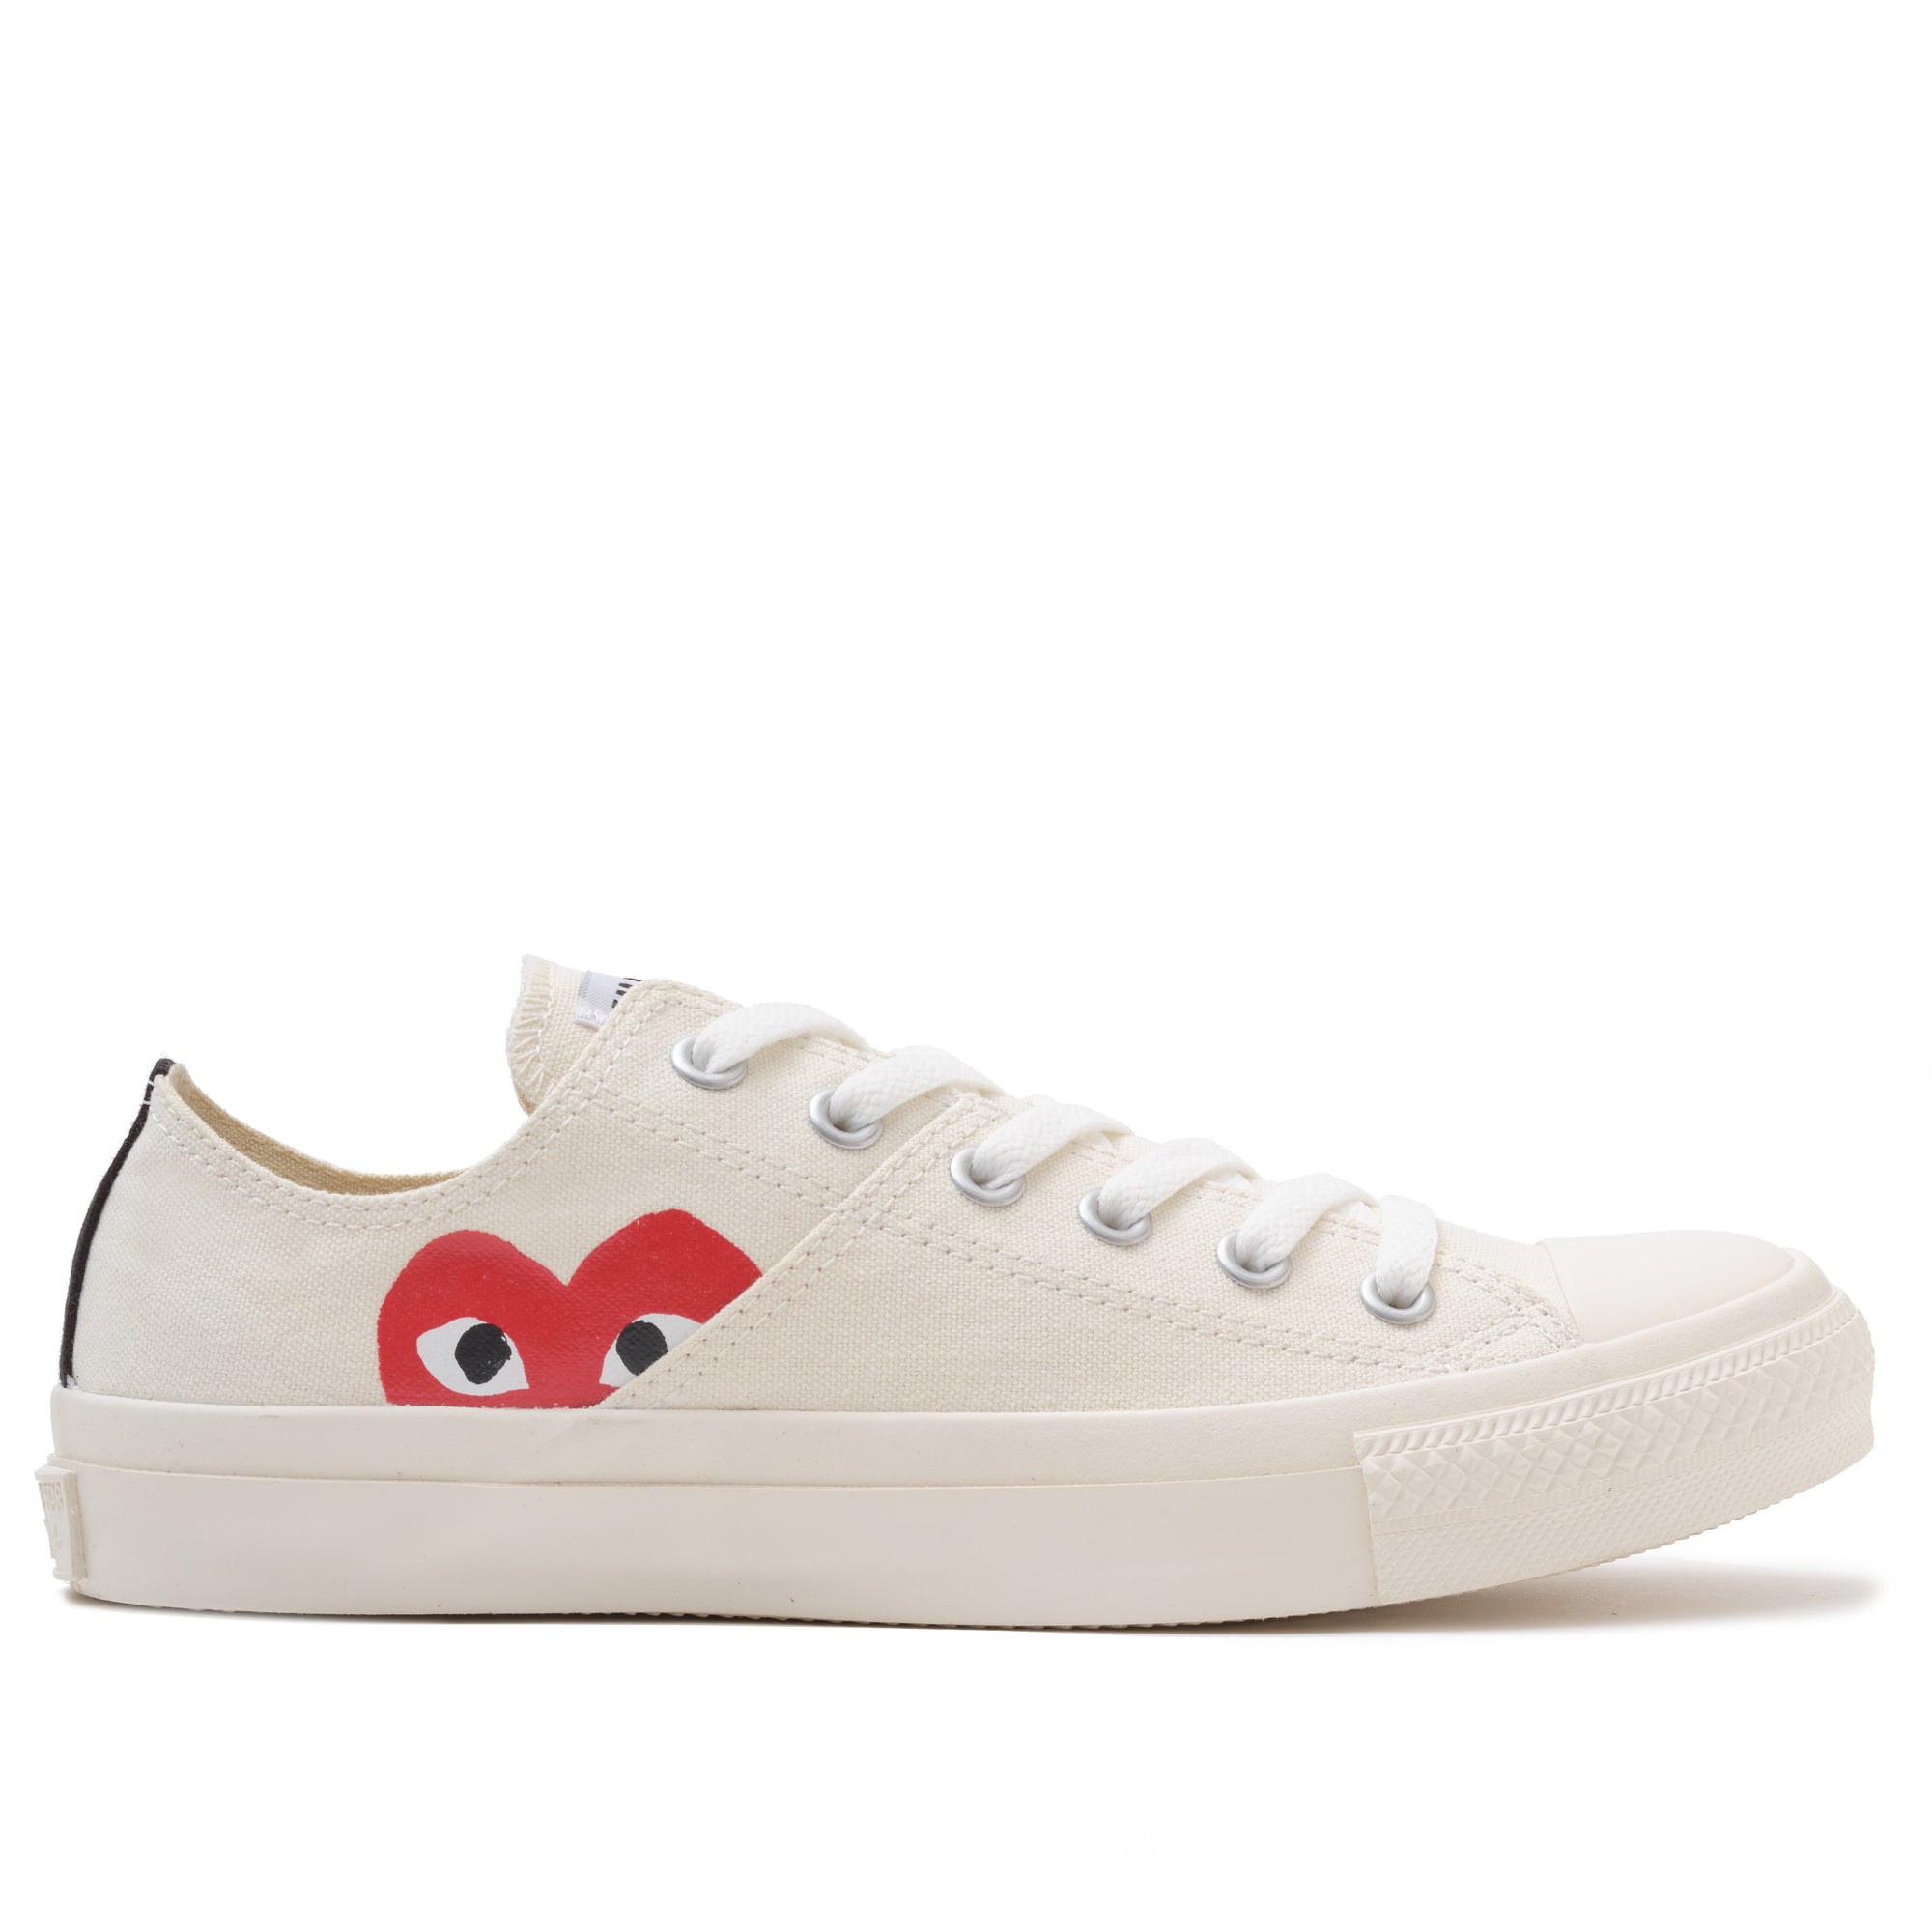 PLAY CDG CONVERSE - ALL STAR LOW - (WHITE) view 1